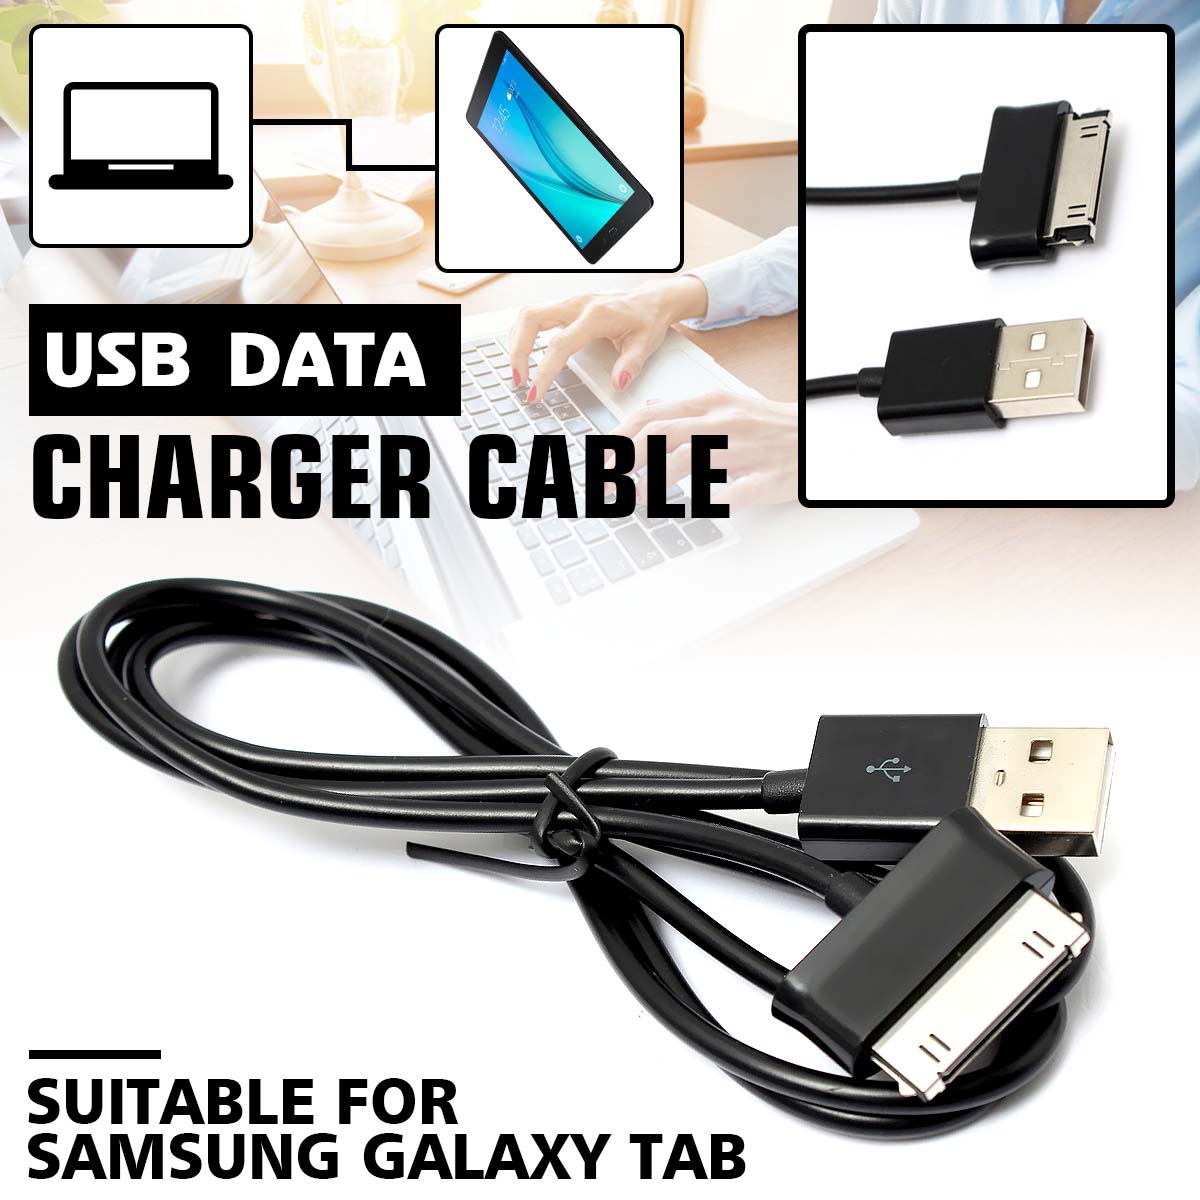 3 NEW USB Charger Cable for Android Samsung Galaxy TAB TABLET 7.0" 8.9" 10.1"